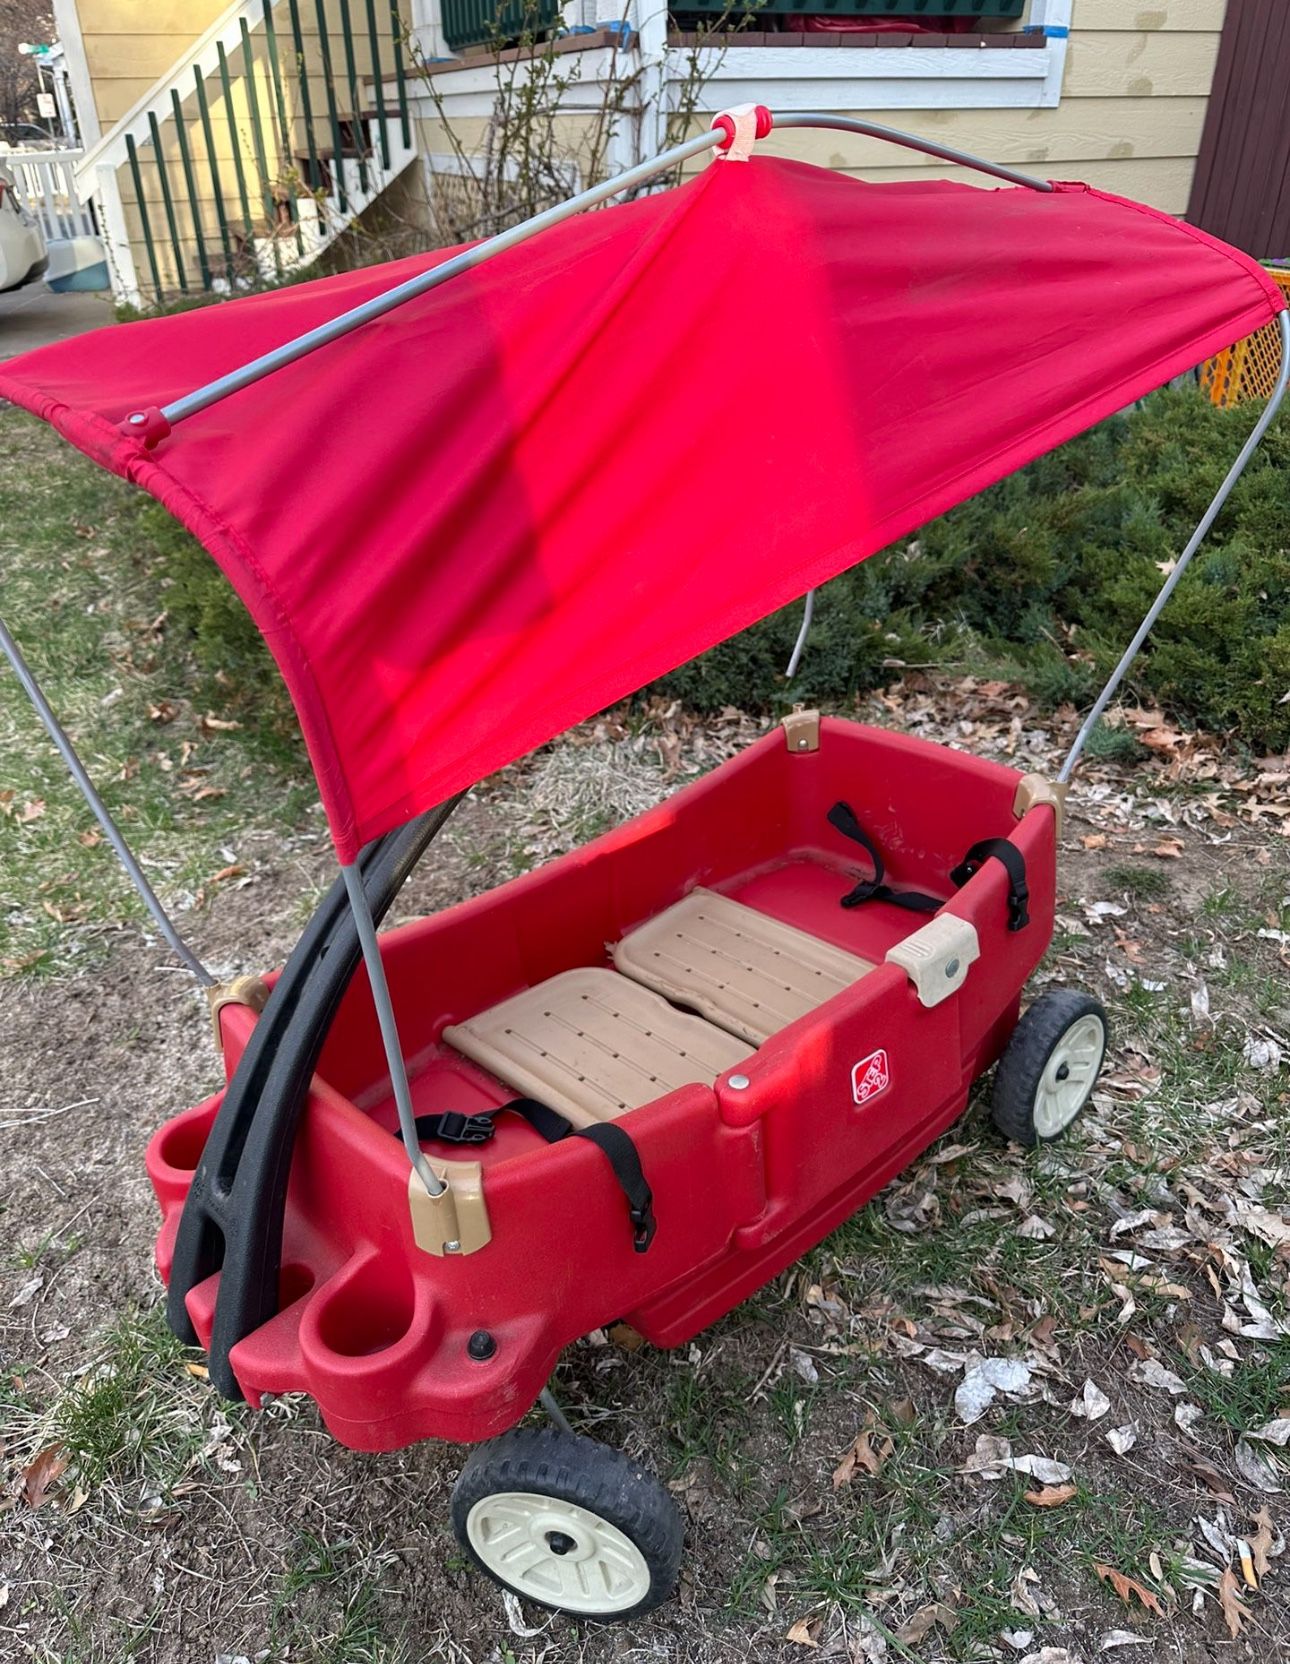 Step2 All Around Canopy Wagon for Kids